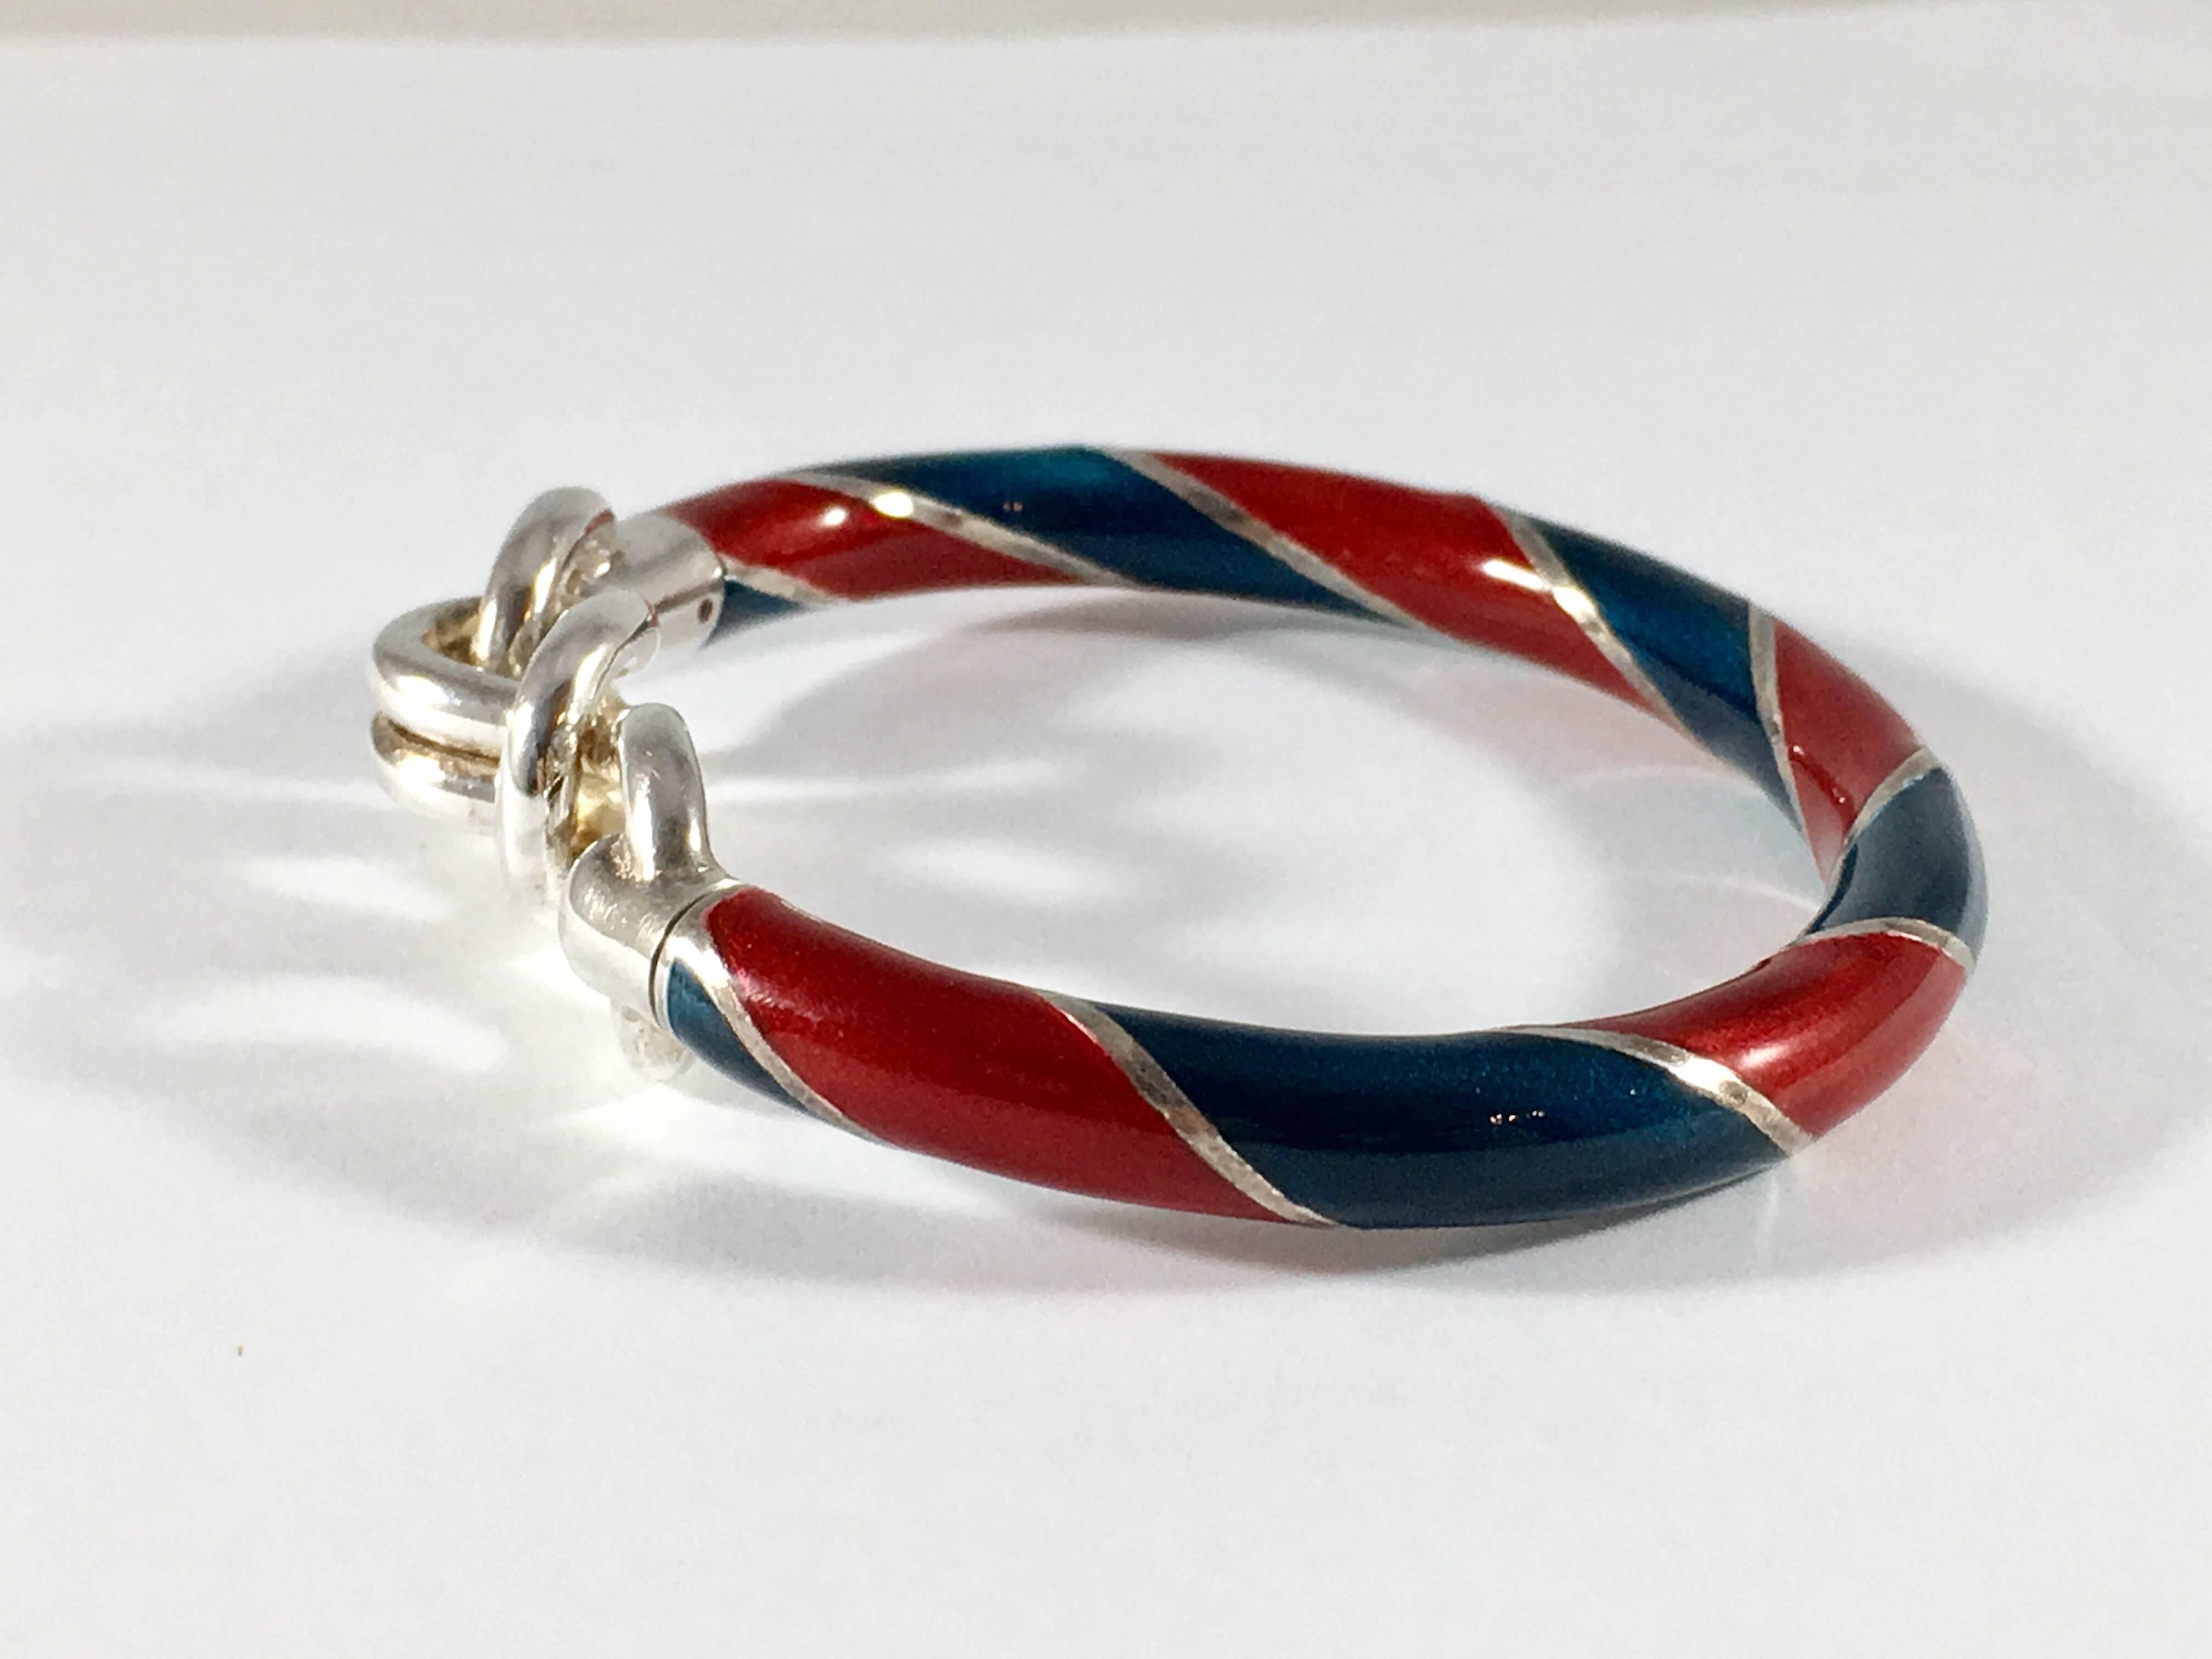 Vintage Gucci Sterling Silver Bracelet with Enamel Stripes of Red and Blue 1980s In Excellent Condition For Sale In Chicago, IL